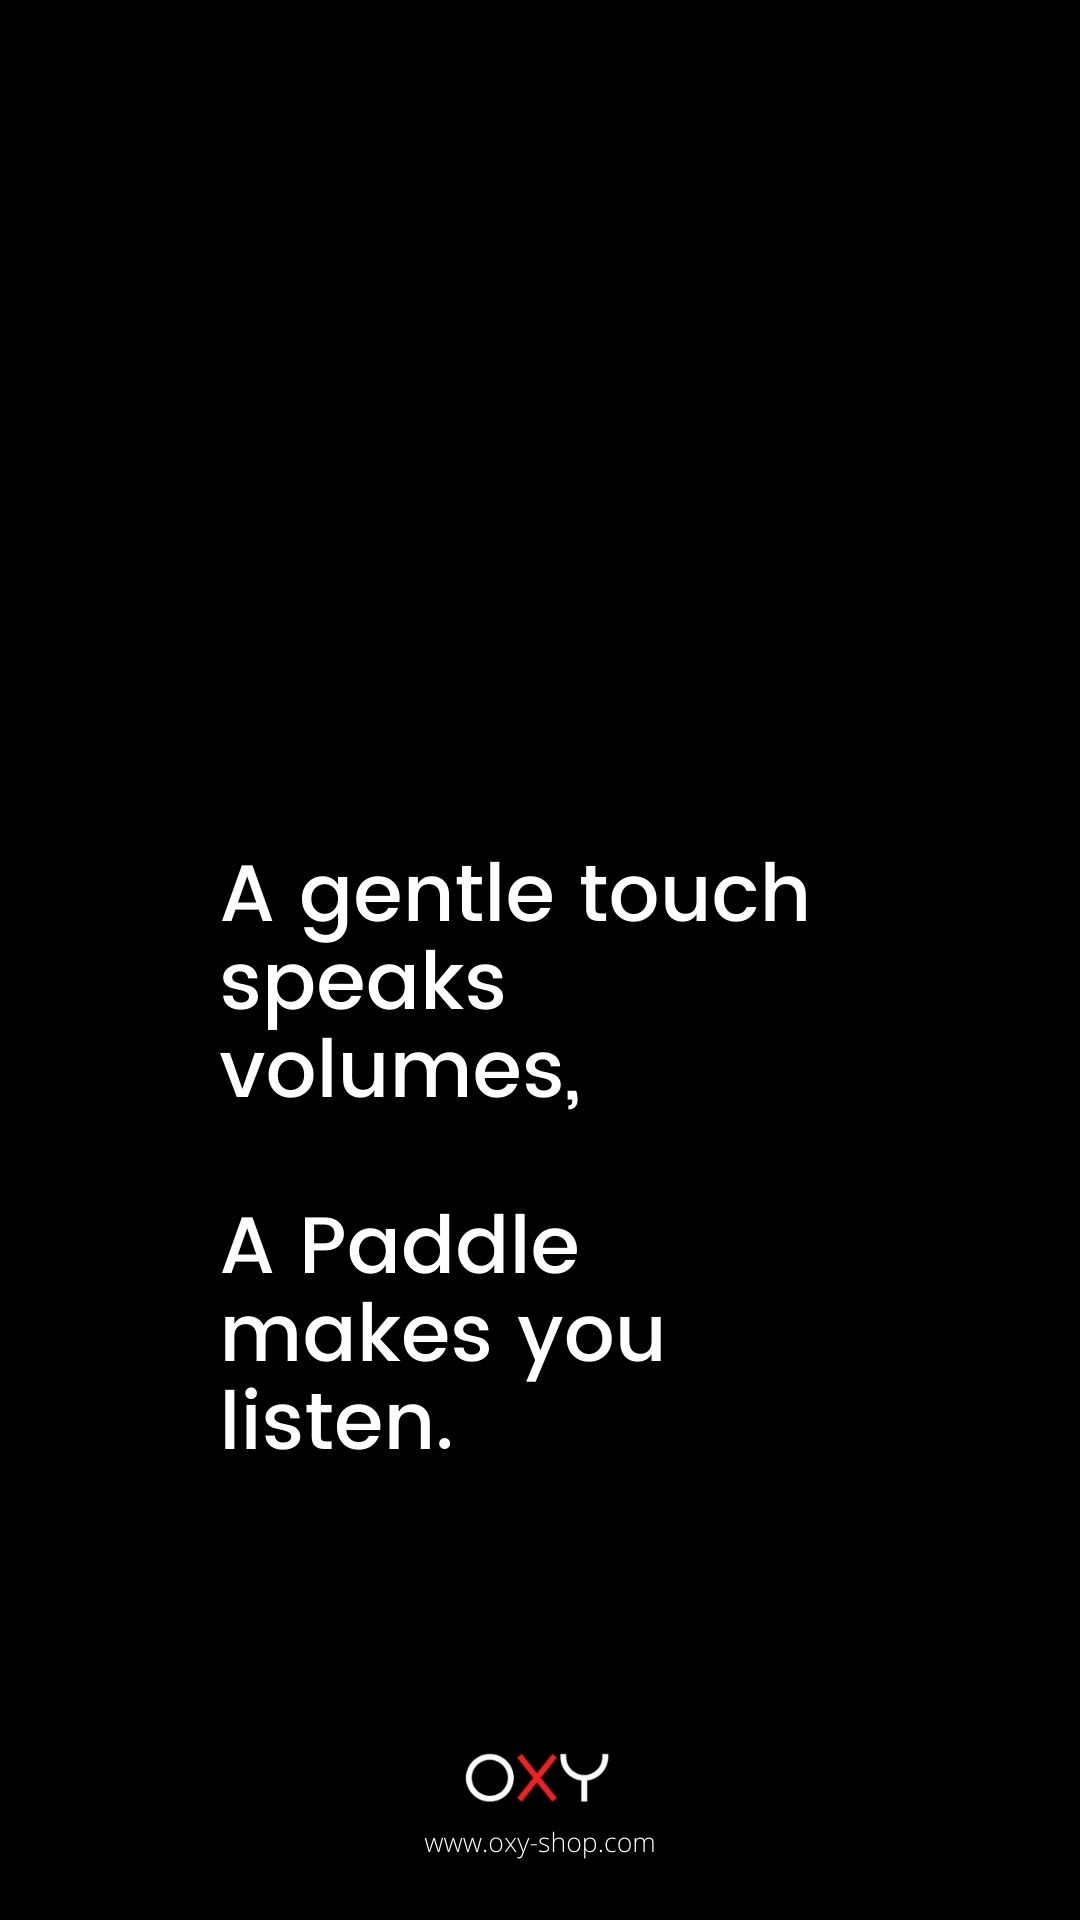 A gentle touch speaks volumes, a paddle makes you listen.- BDSM wallpaper